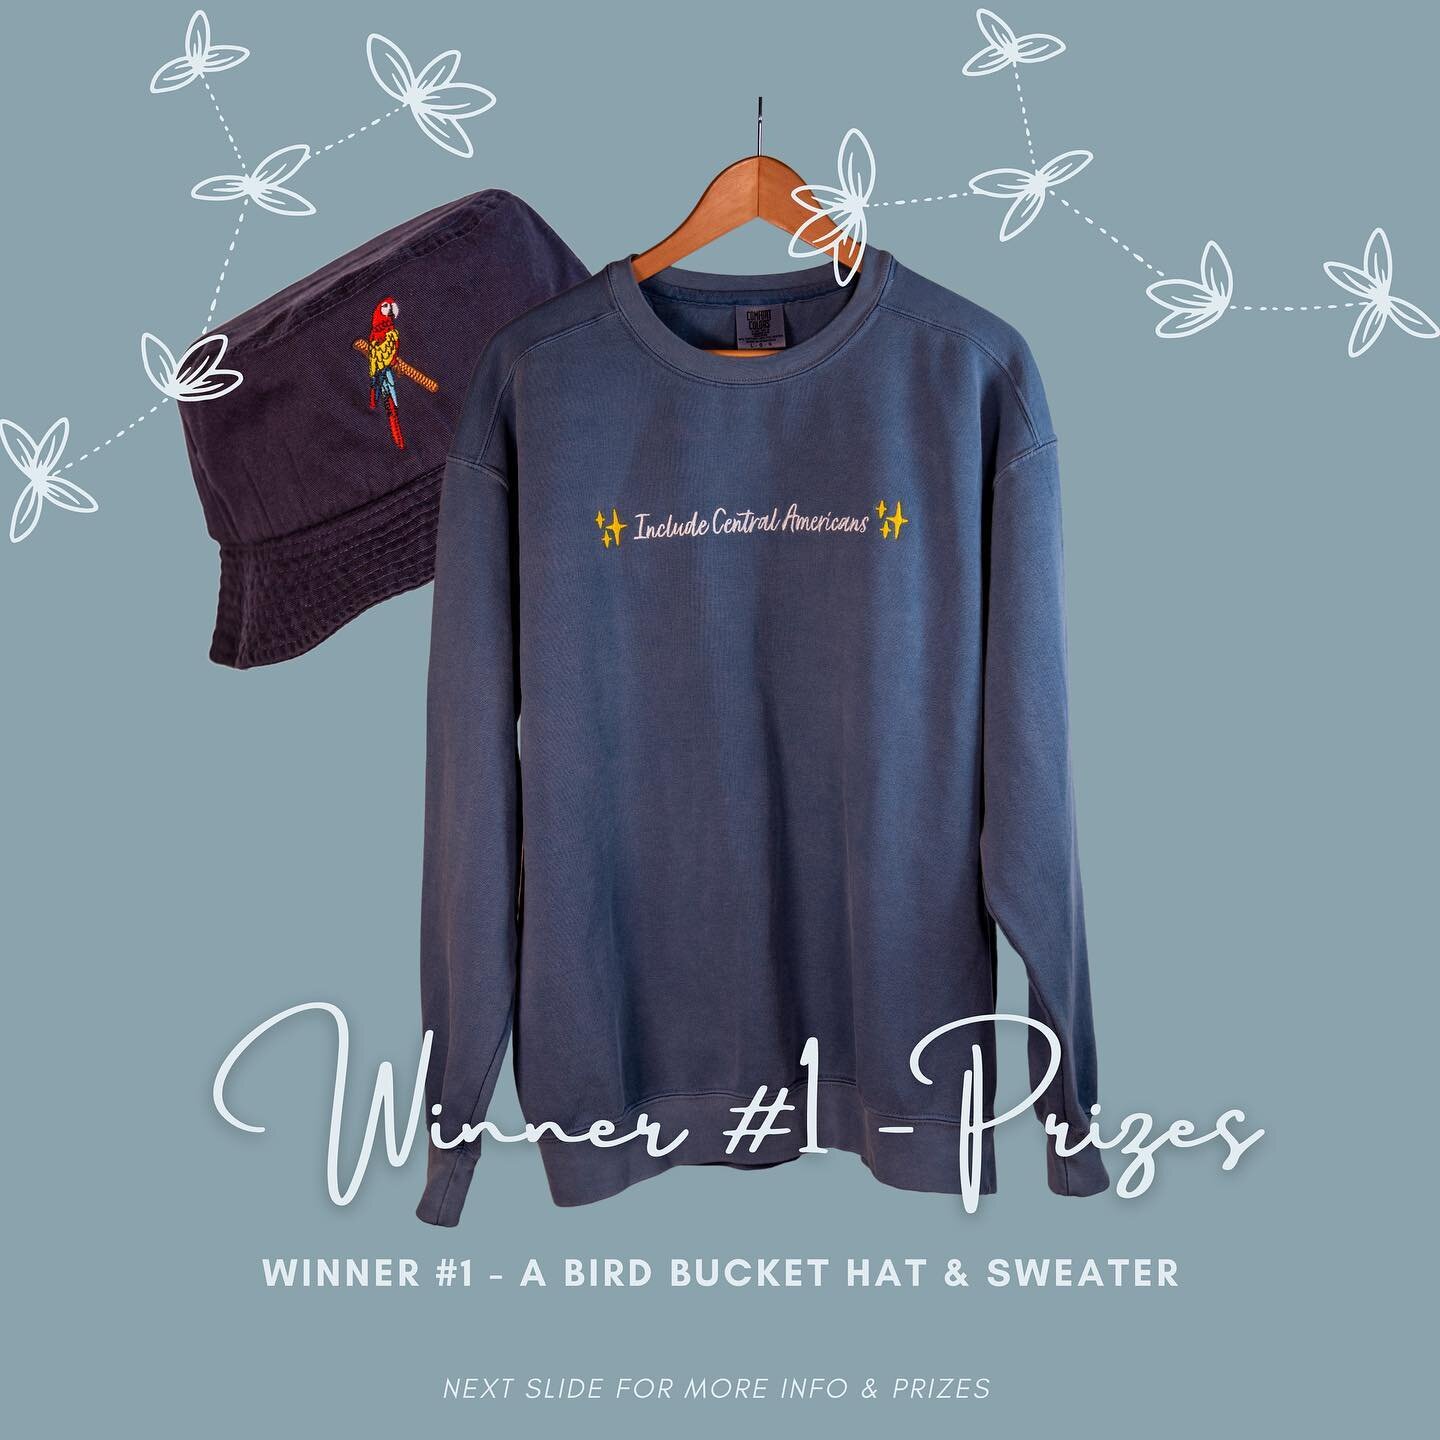 ✨Raffle✨

Winner #1 Prize:

A Bird Bucket Hat &amp; Sweater

✨ HOW TO ENTER ✨

$5 FOR EACH ENTRY

🎙 Send your entry to our Venmo with your social media Username (IG or TW) as a comment. 

🎙 You can enter multiple times

🎙 If you don't have or use 